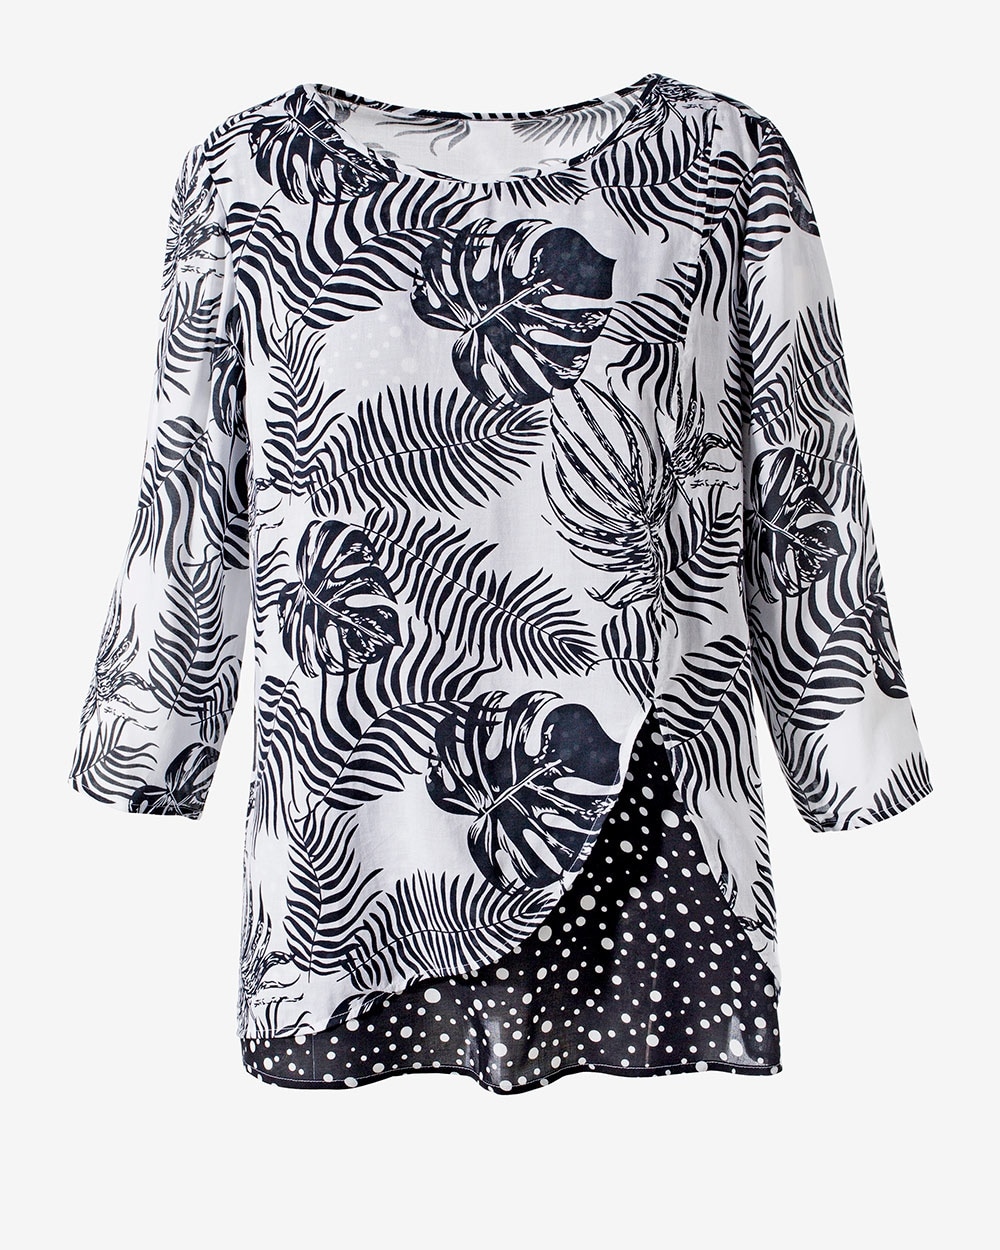 Tropical Beauty Layered Top Tunic